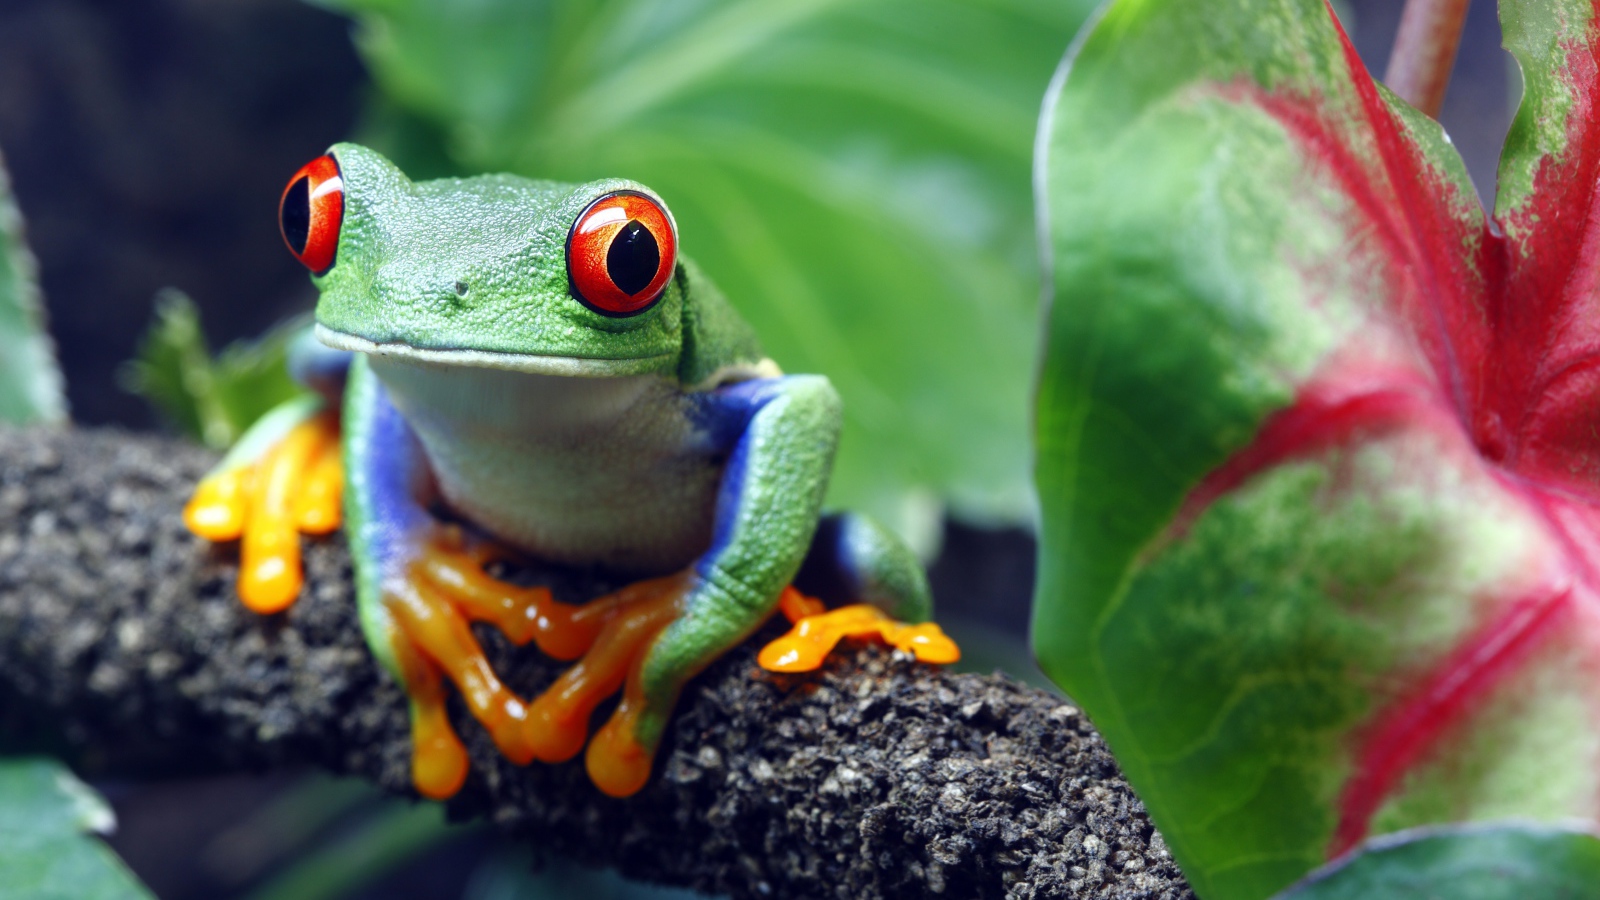 A big green frog with red eyes sits on a branch